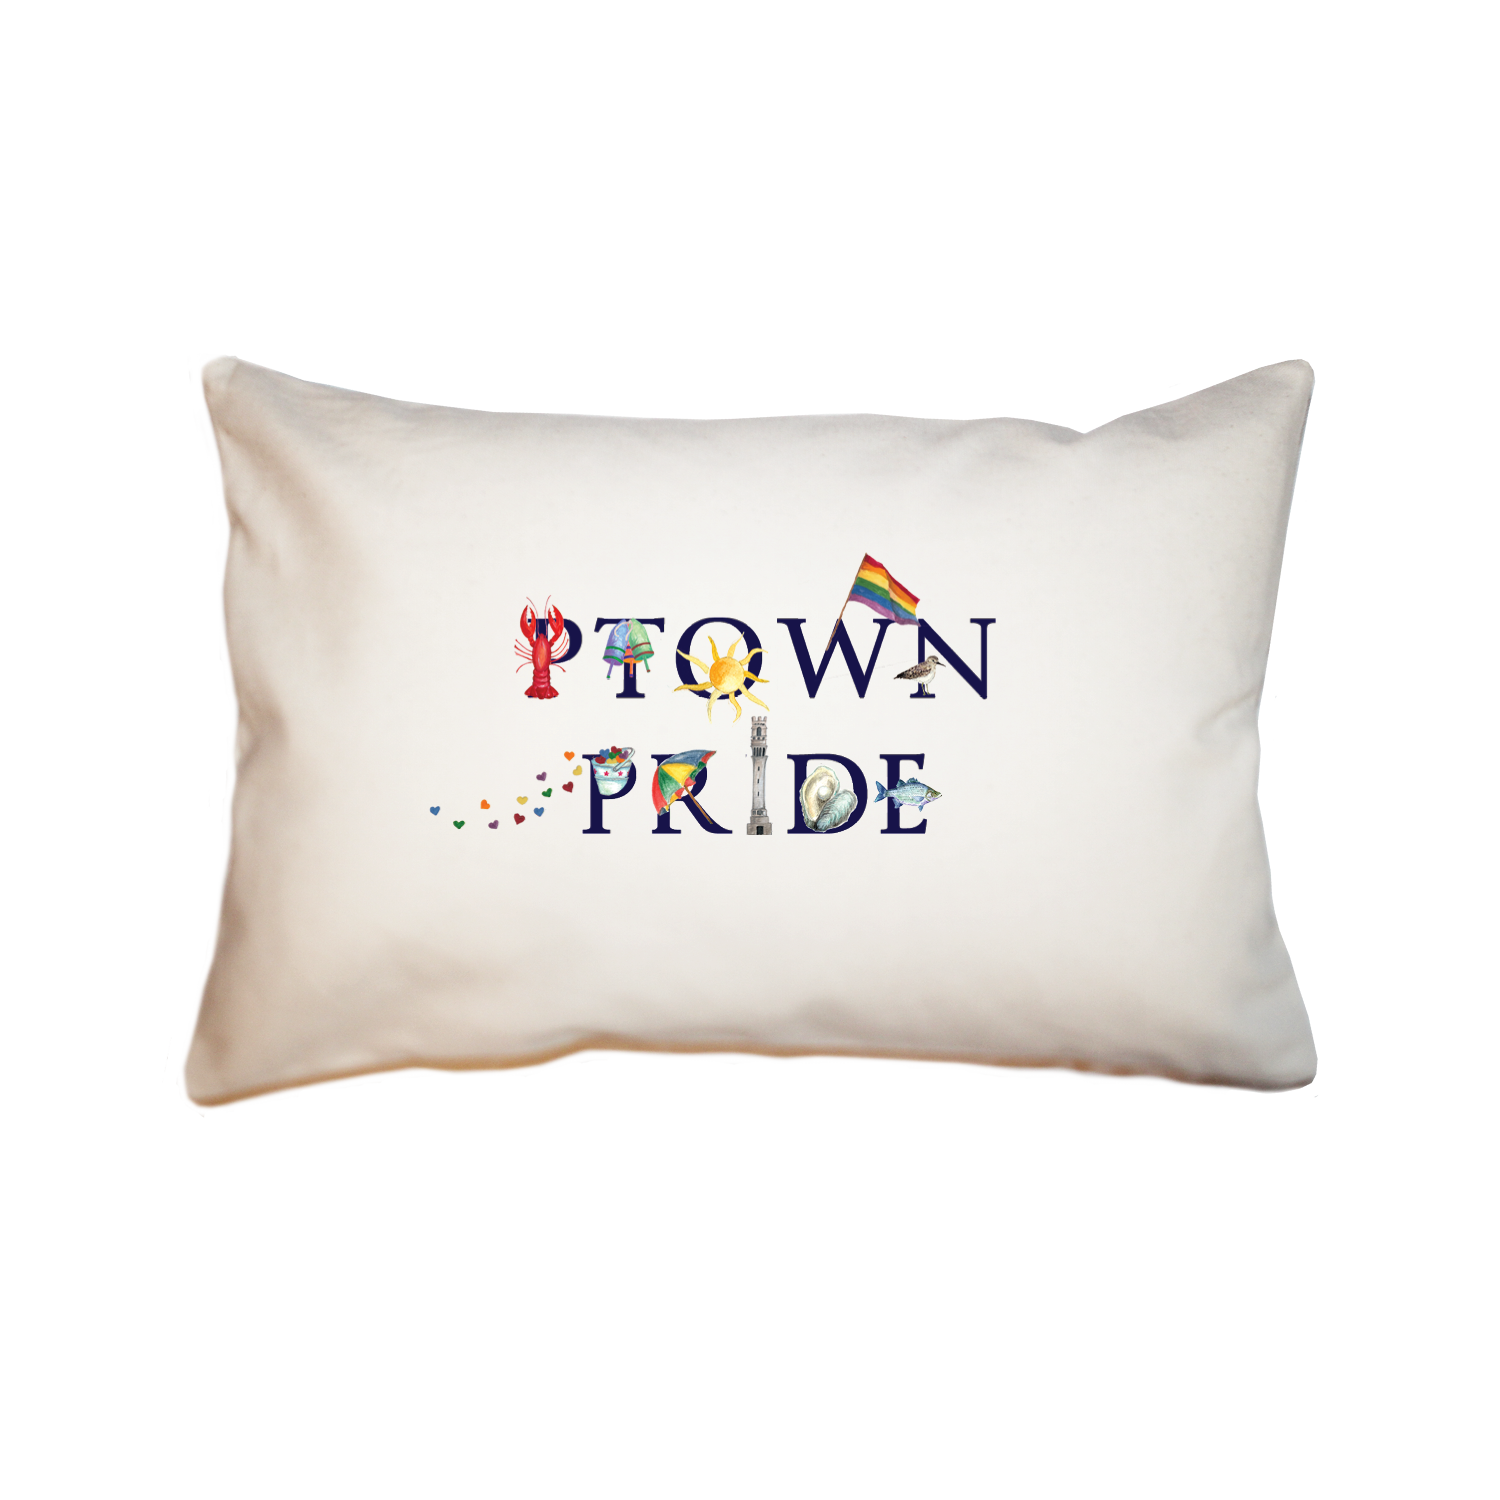 ptown pride large rectangle pillow